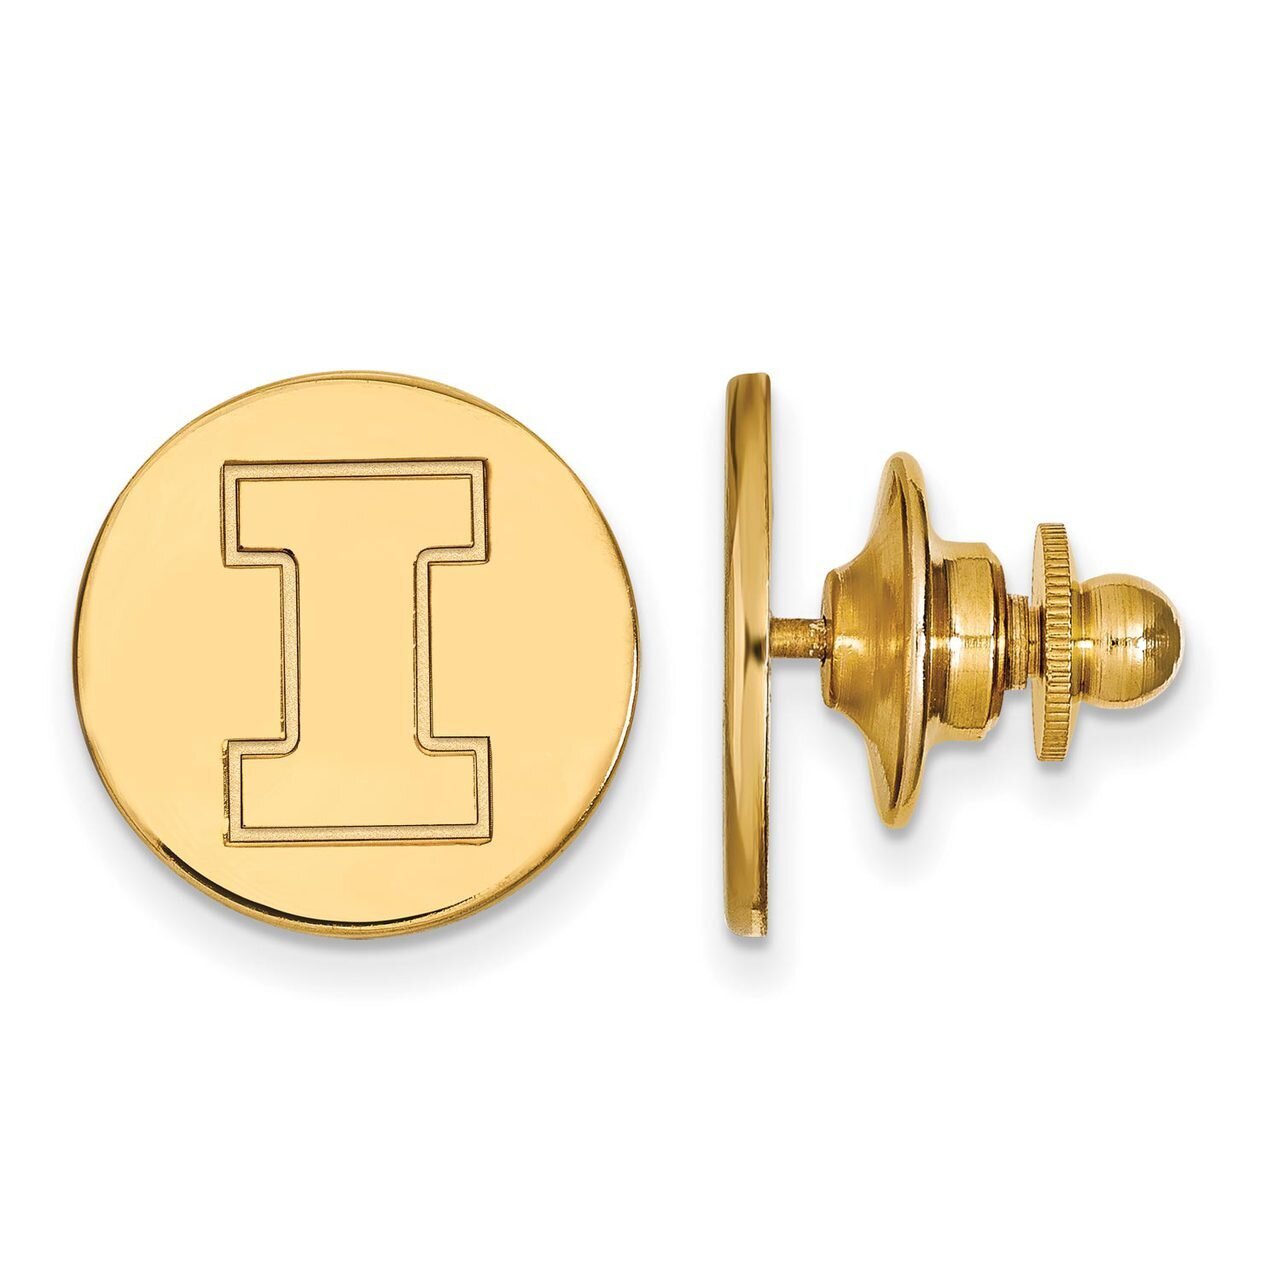 University of Illinois Lapel Pin Gold-plated Silver GP011UIL